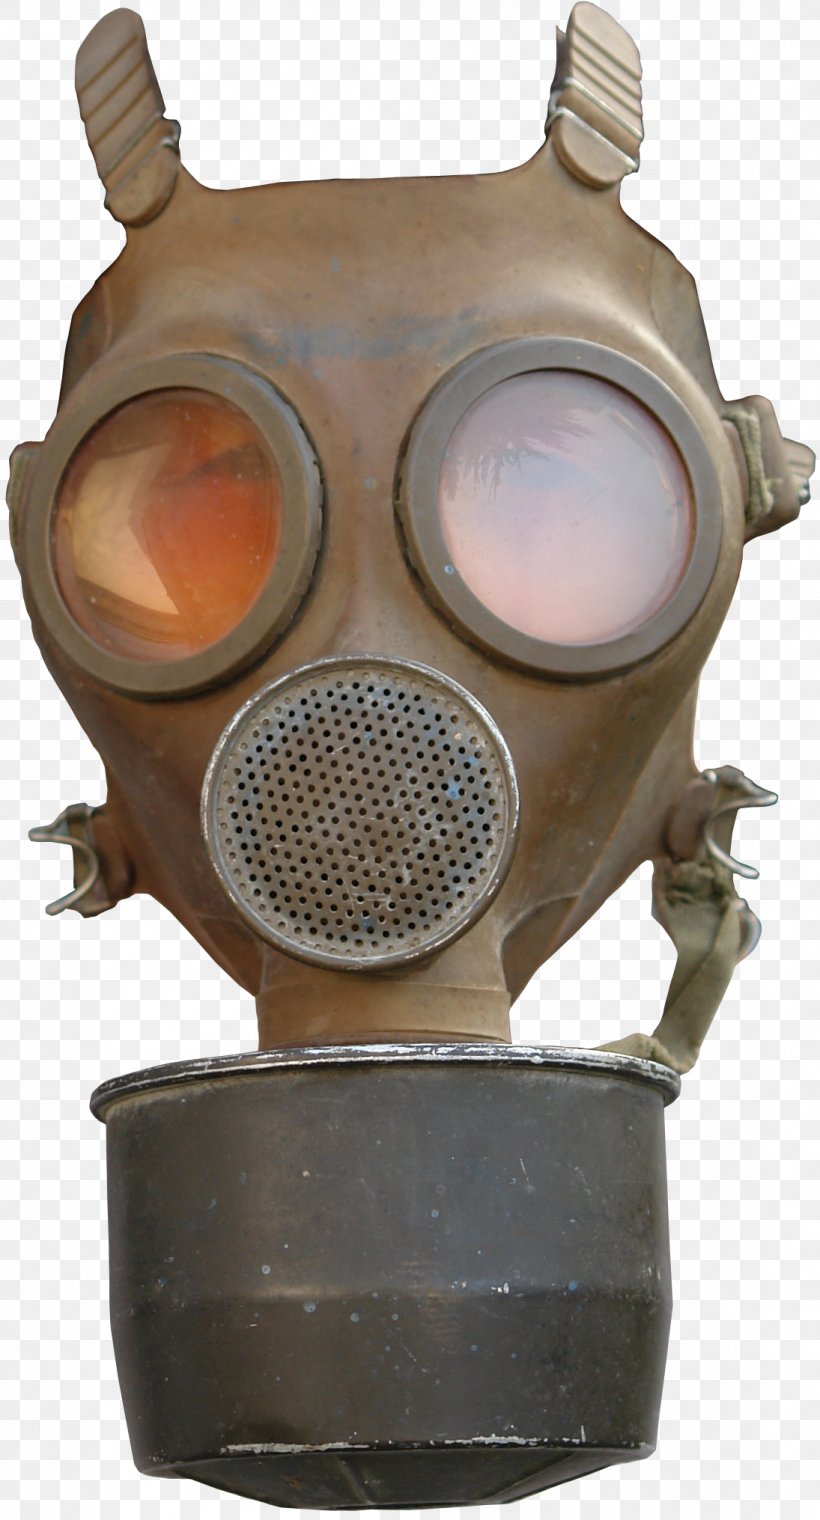 Gas Mask Image File Formats, PNG, 1095x2031px, Gas Mask, Display Resolution, Headgear, Image File Formats, Mask Download Free